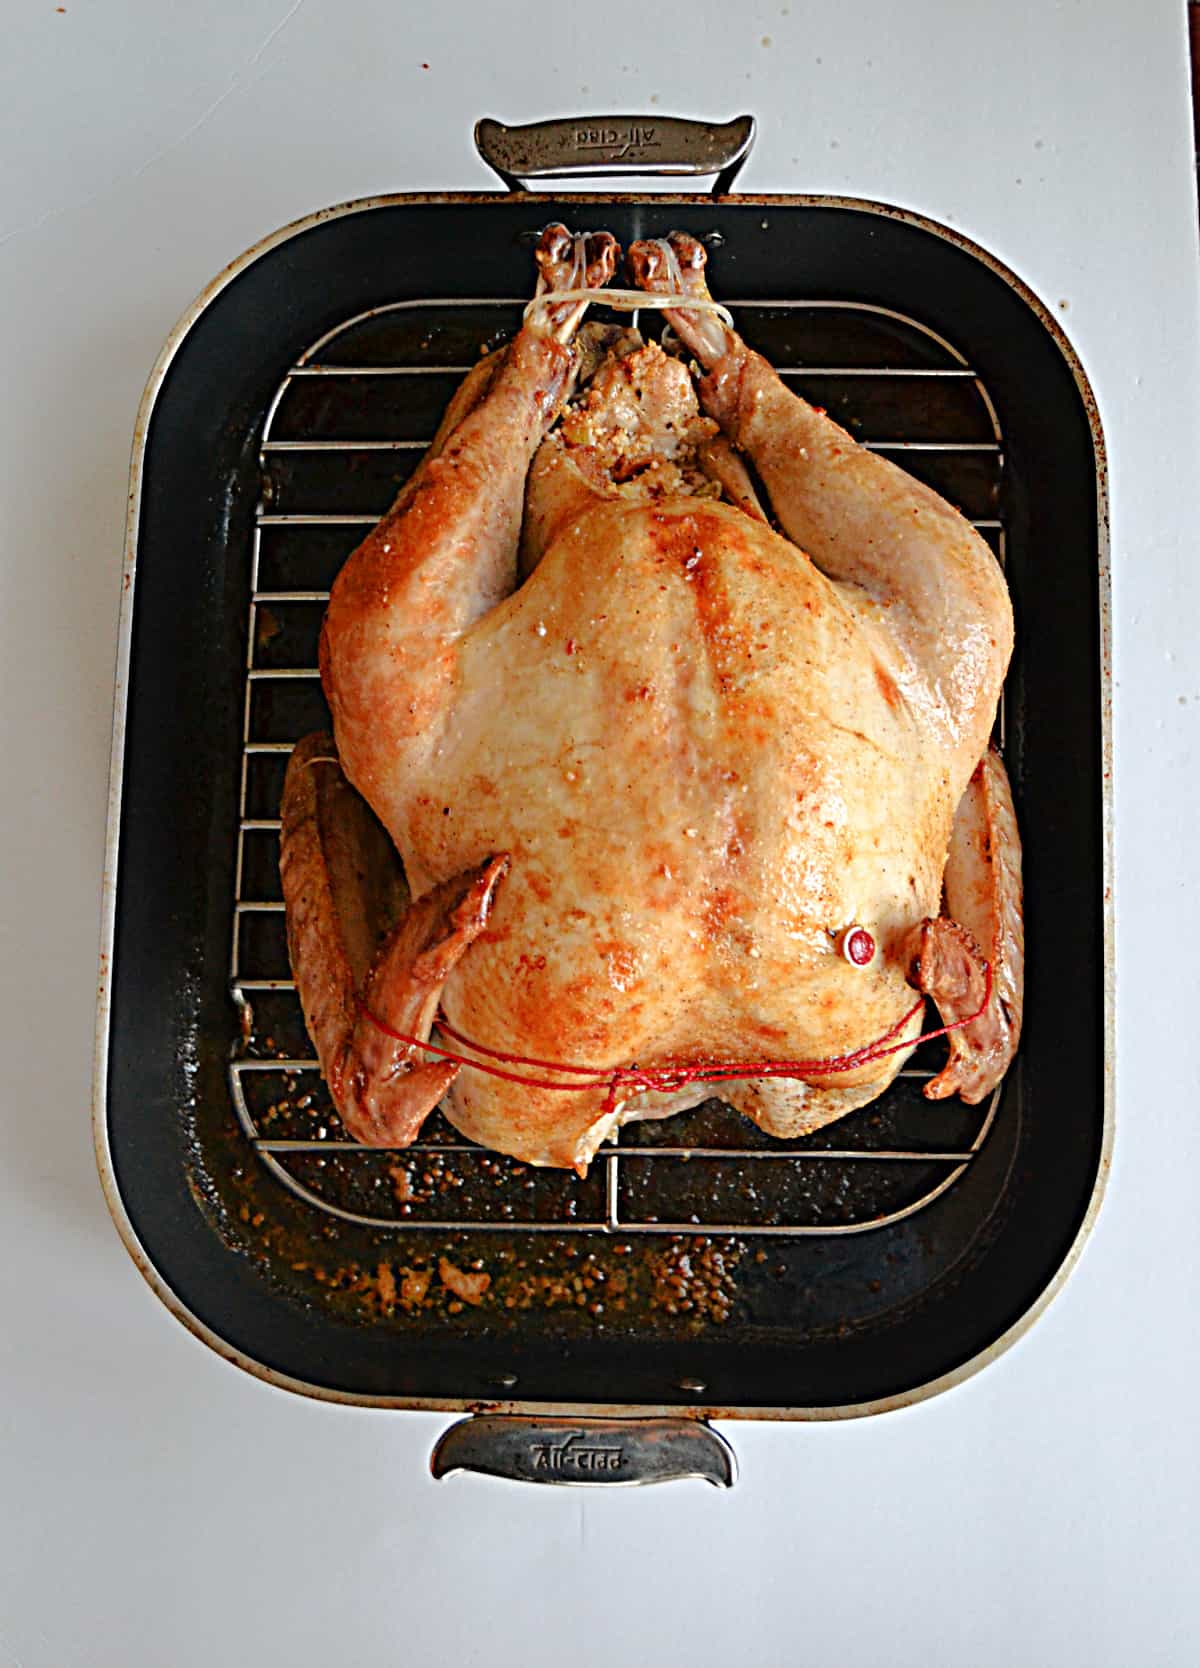 A golden brown turkey in a roasting pan.